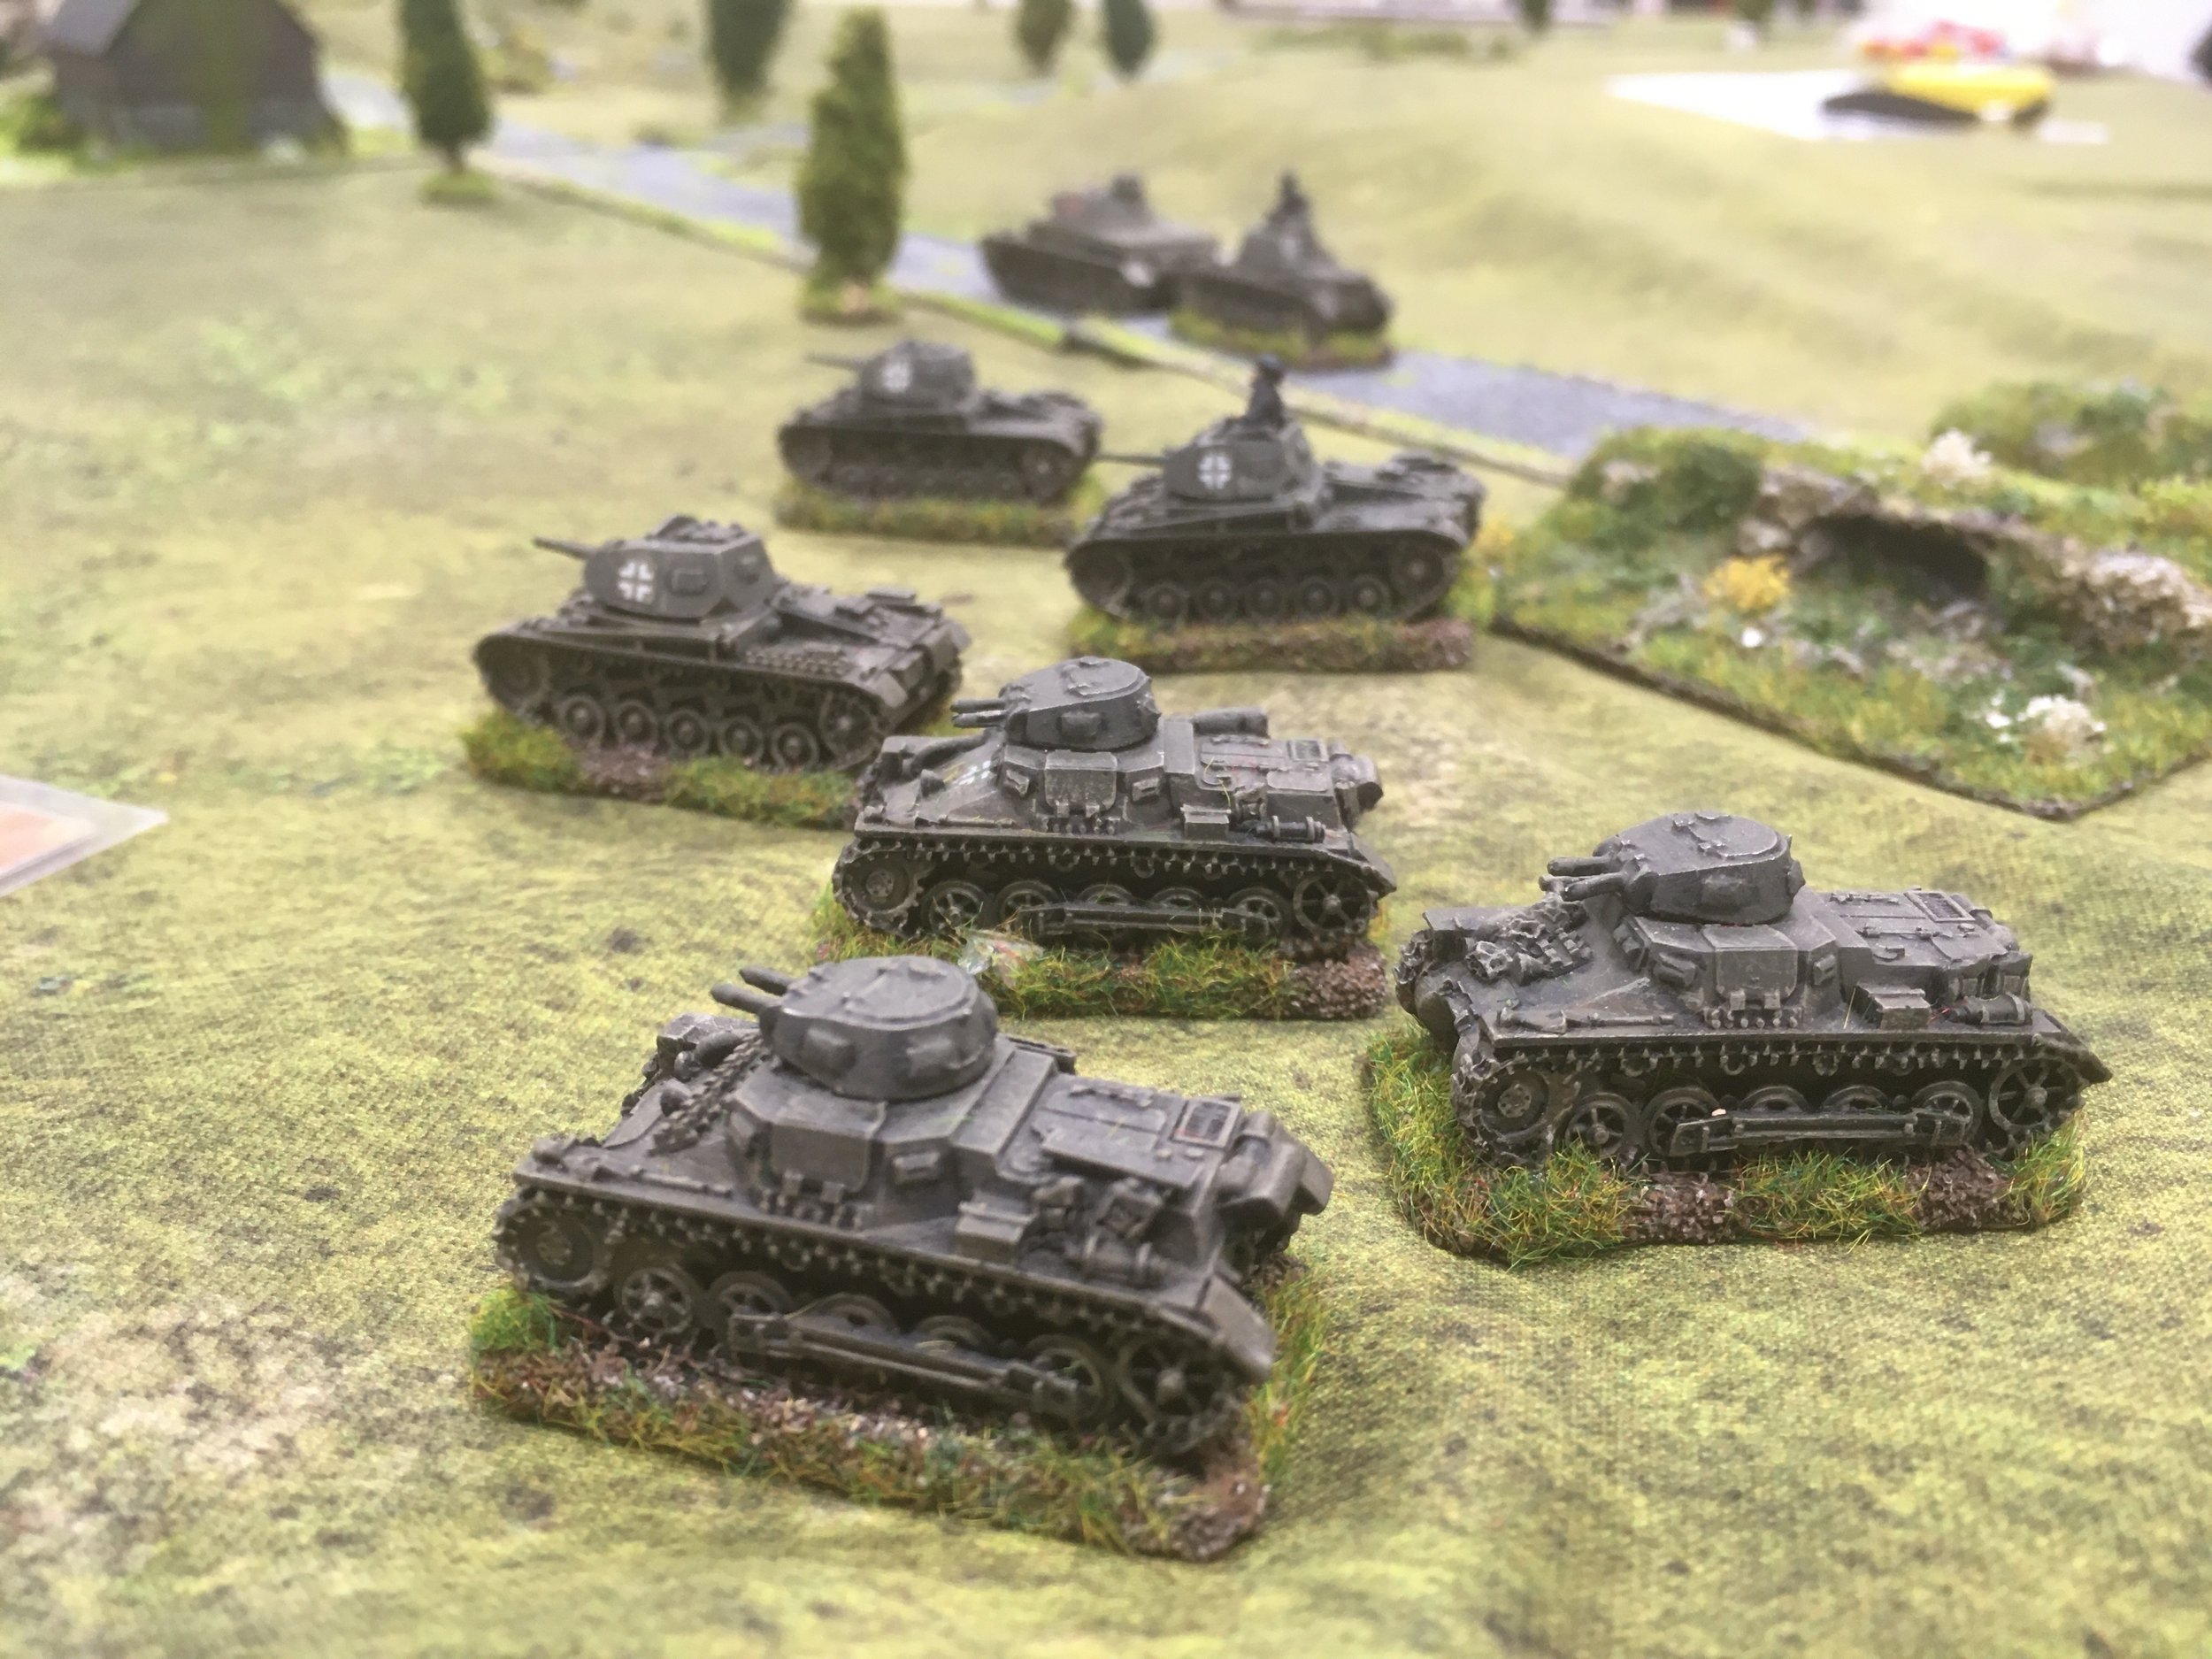 Vorwärts Panzers! The German armour, singing the Panzerlied, arrive on the German left flank.